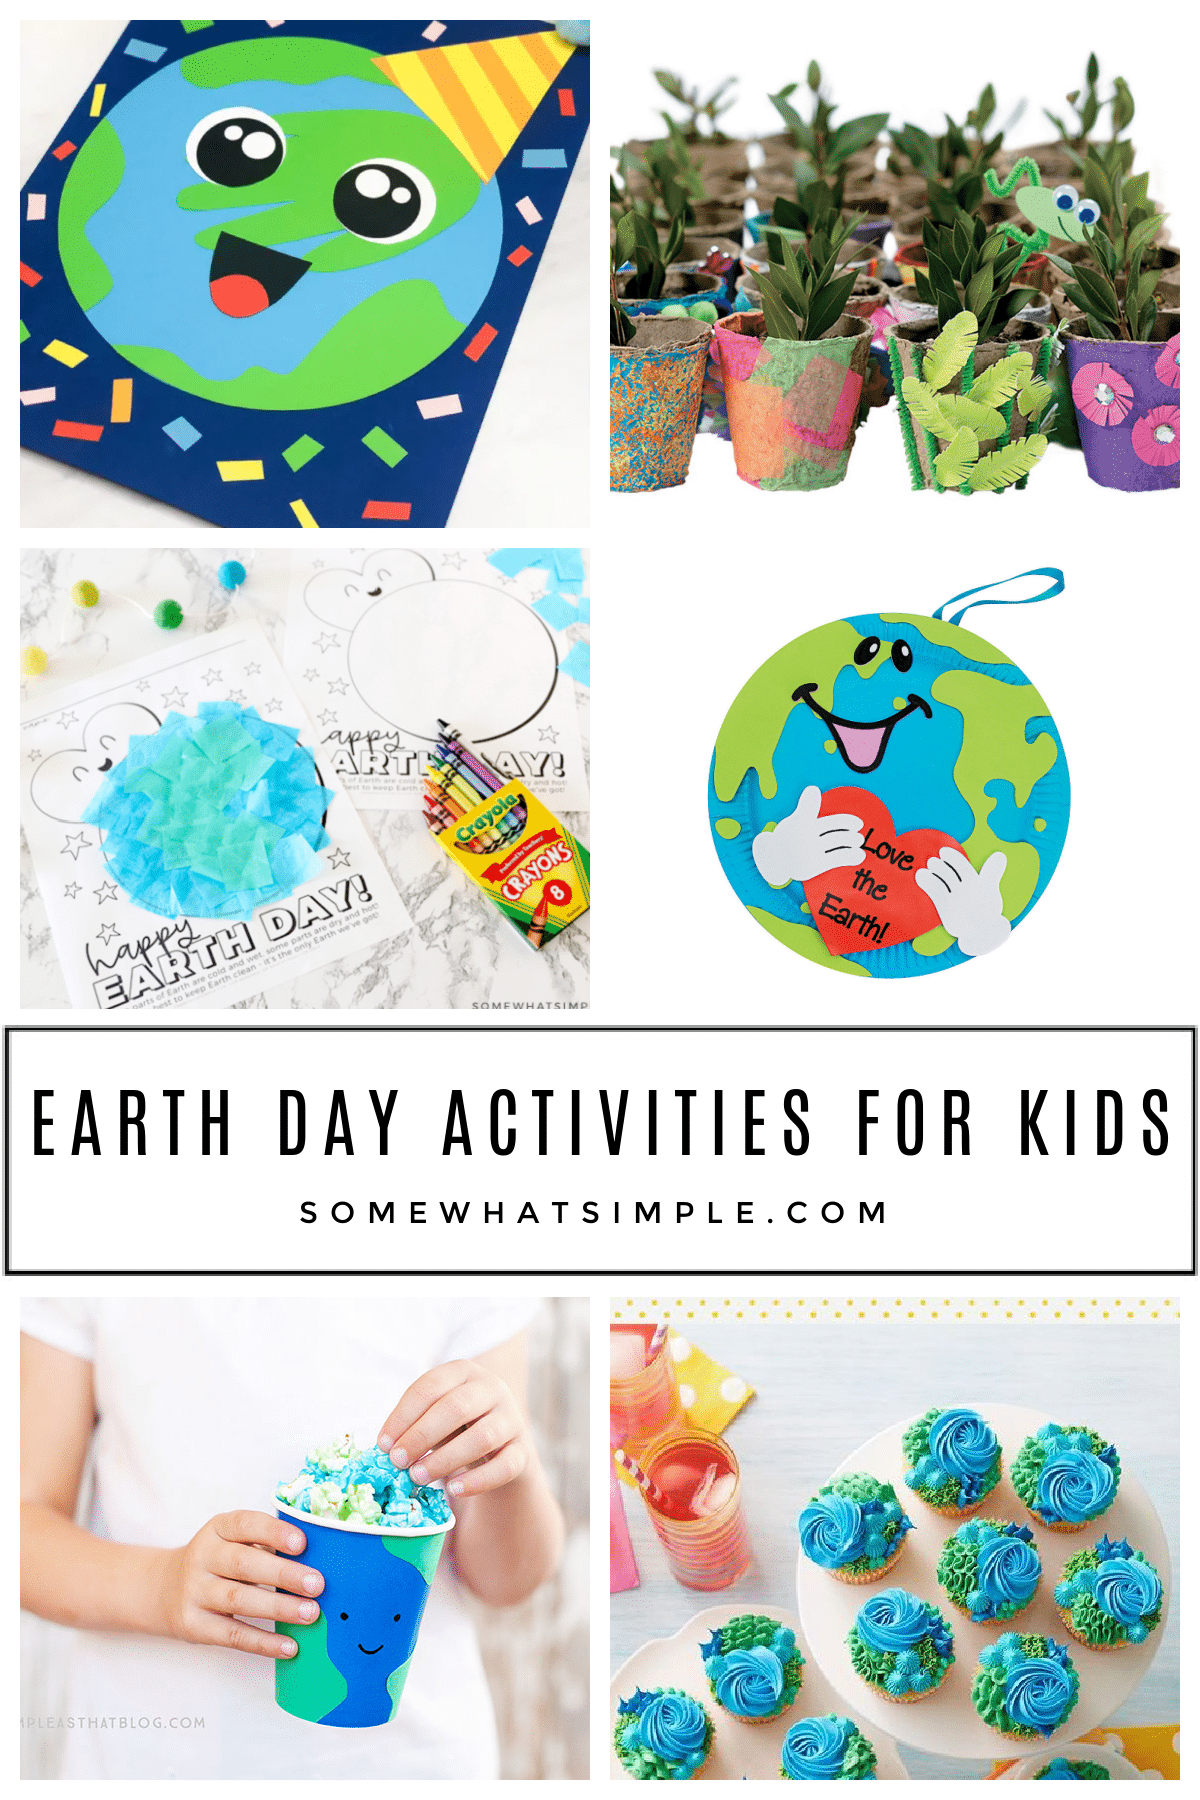 Celebrate Earth Day and help beautify your community with these 10 fun and educational Earth Day Activities for Kids! via @somewhatsimple